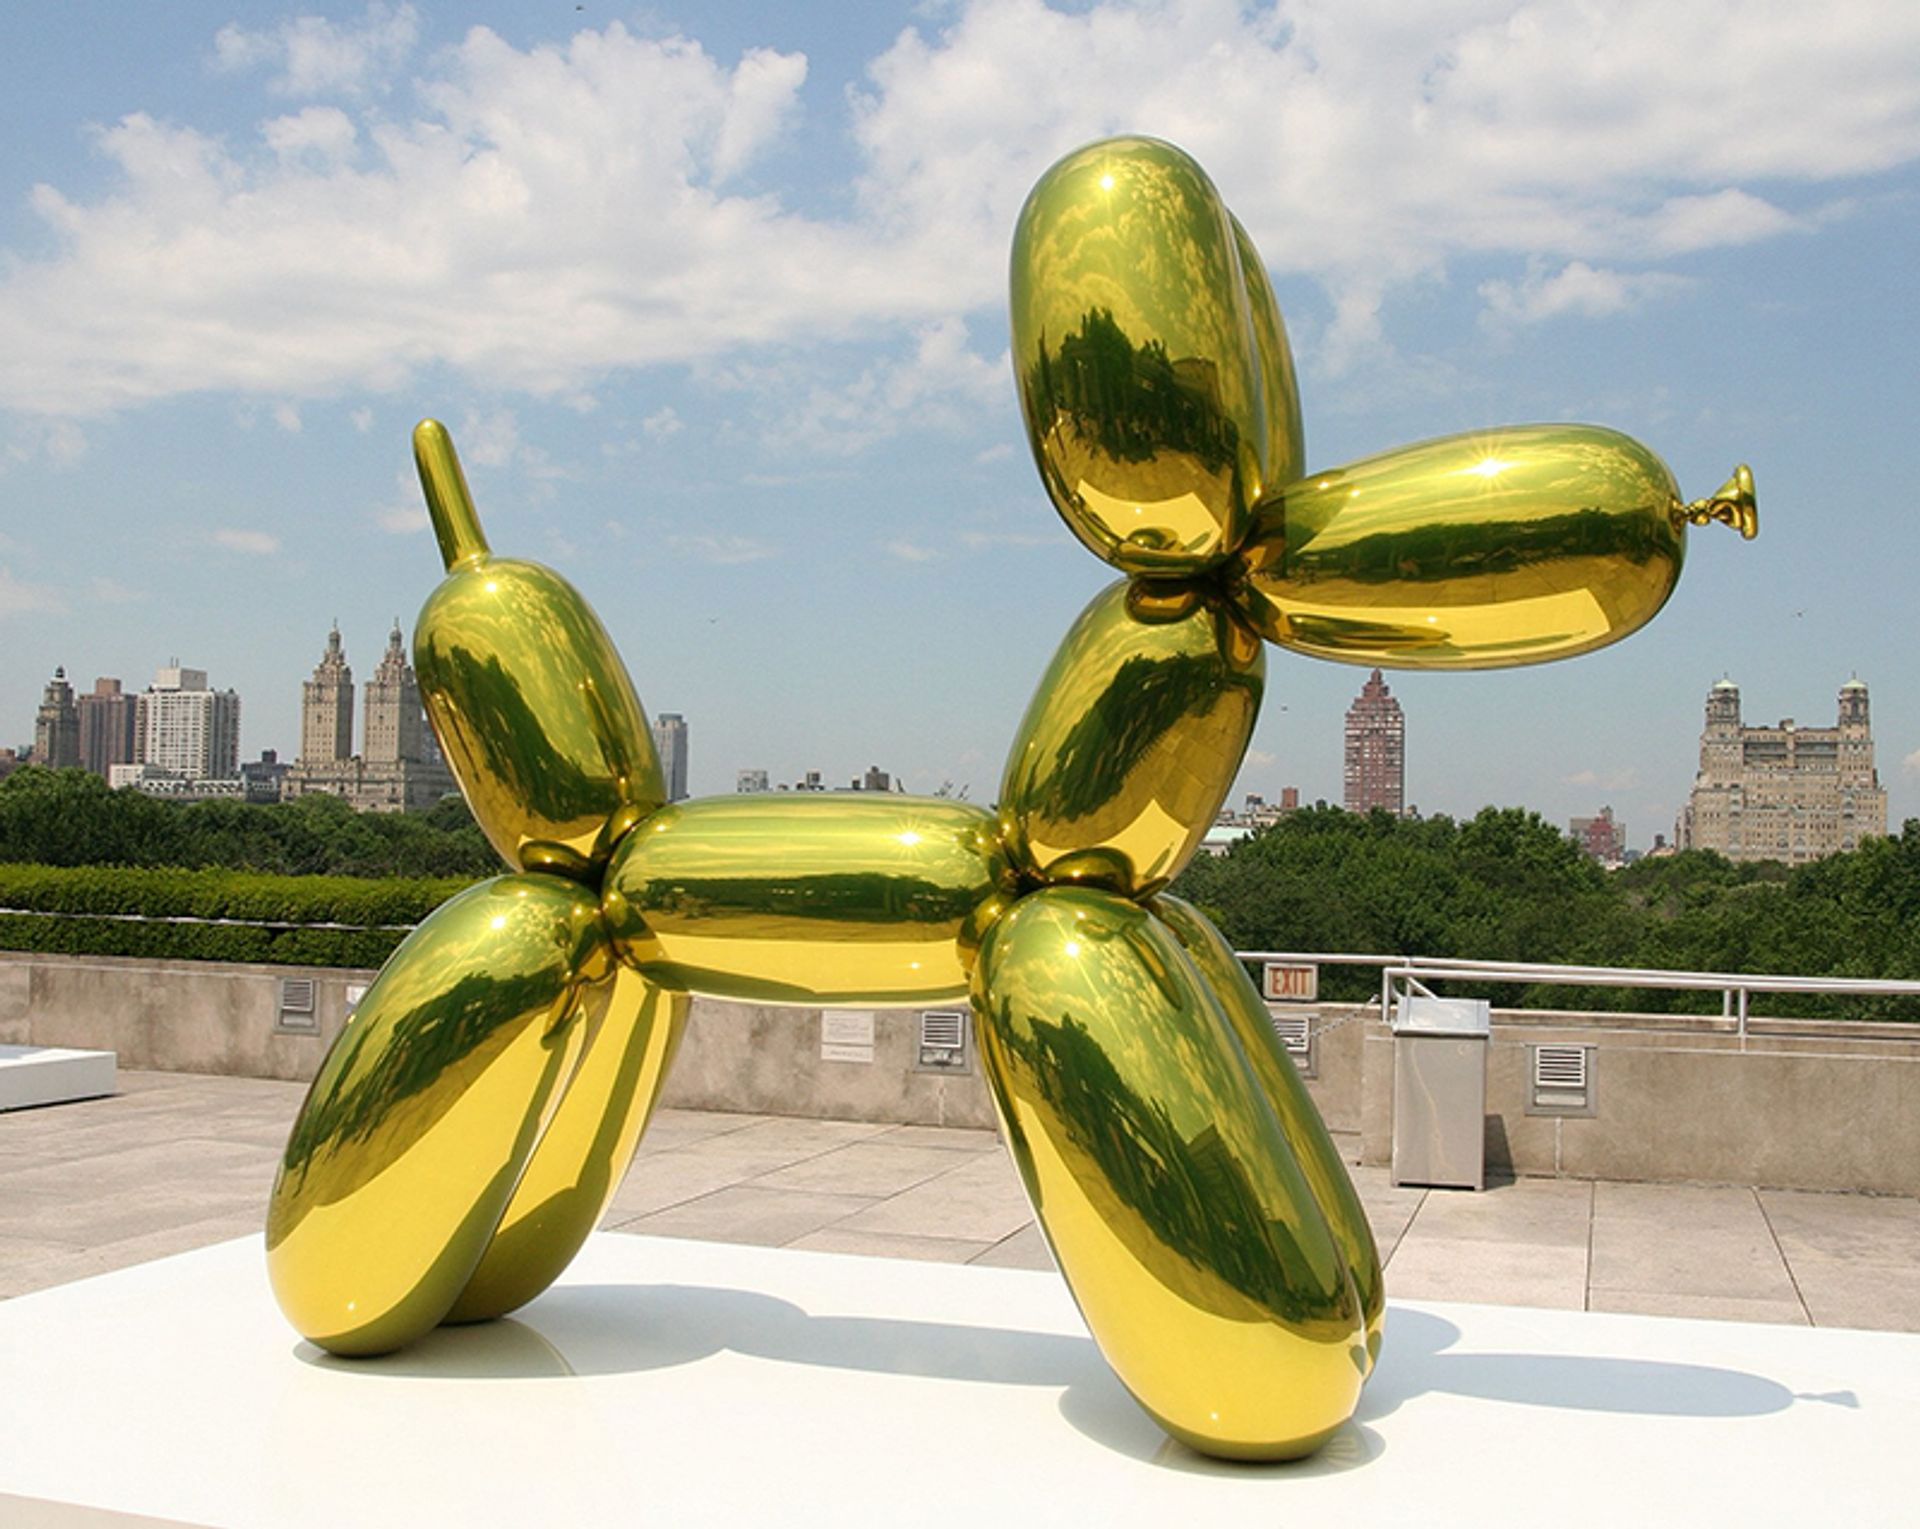 Balloon Dog (Yellow) (1994-2000) by Jeff Koons at the Metropolitan Museum of Art in 2008 Wikimedia Commons